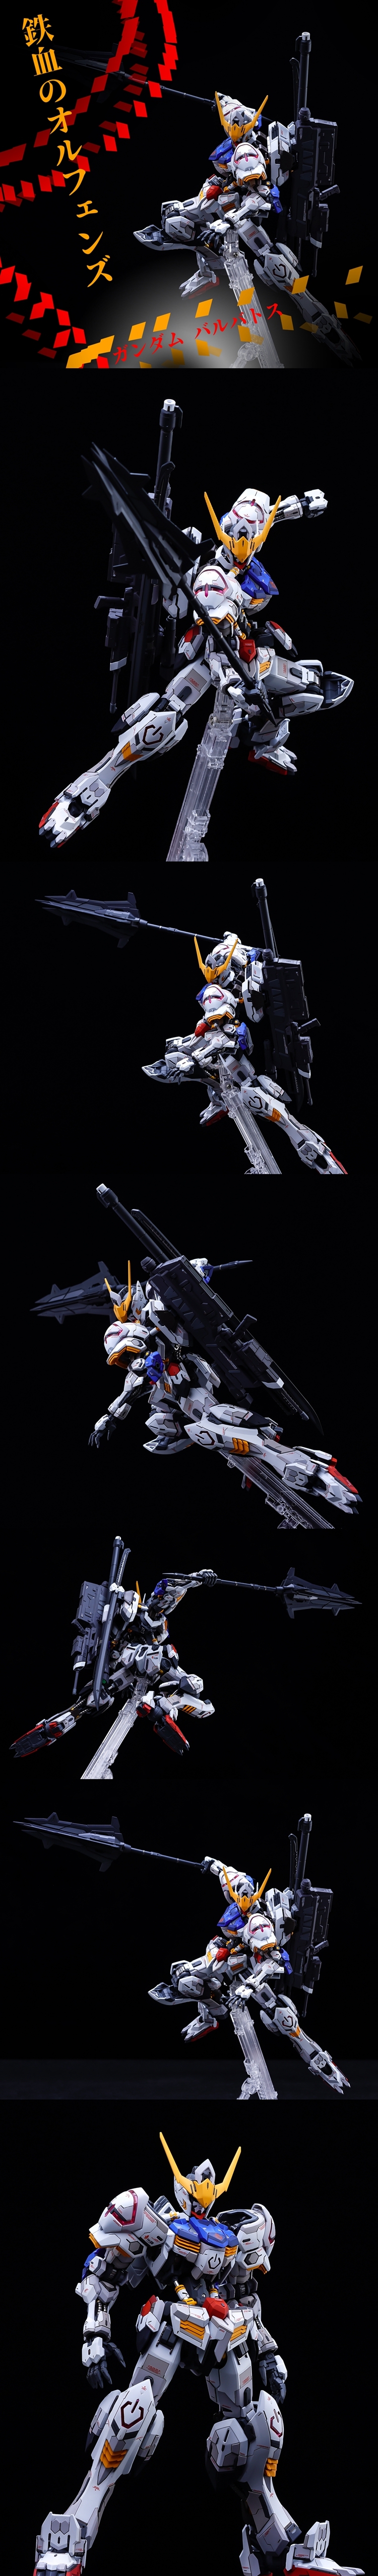 1/35 Barbatos Bust Resin Kit by Amazing Cast (Pre-order)